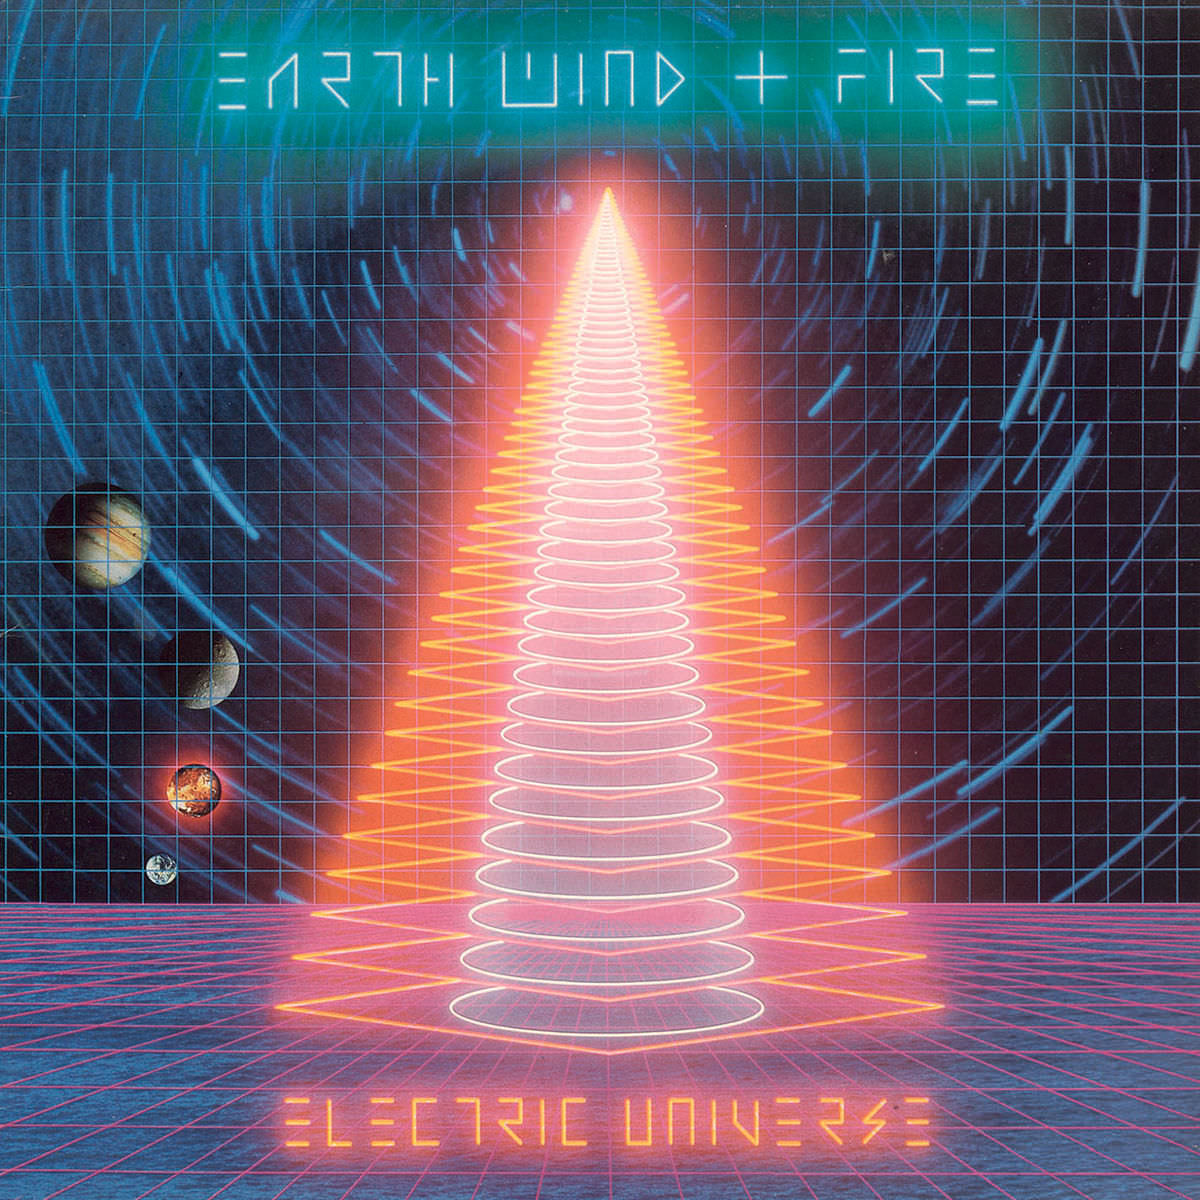 Earth, Wind & Fire – Electric Universe (Expanded Edition) (1983/2016) [FLAC 24bit/96kHz]